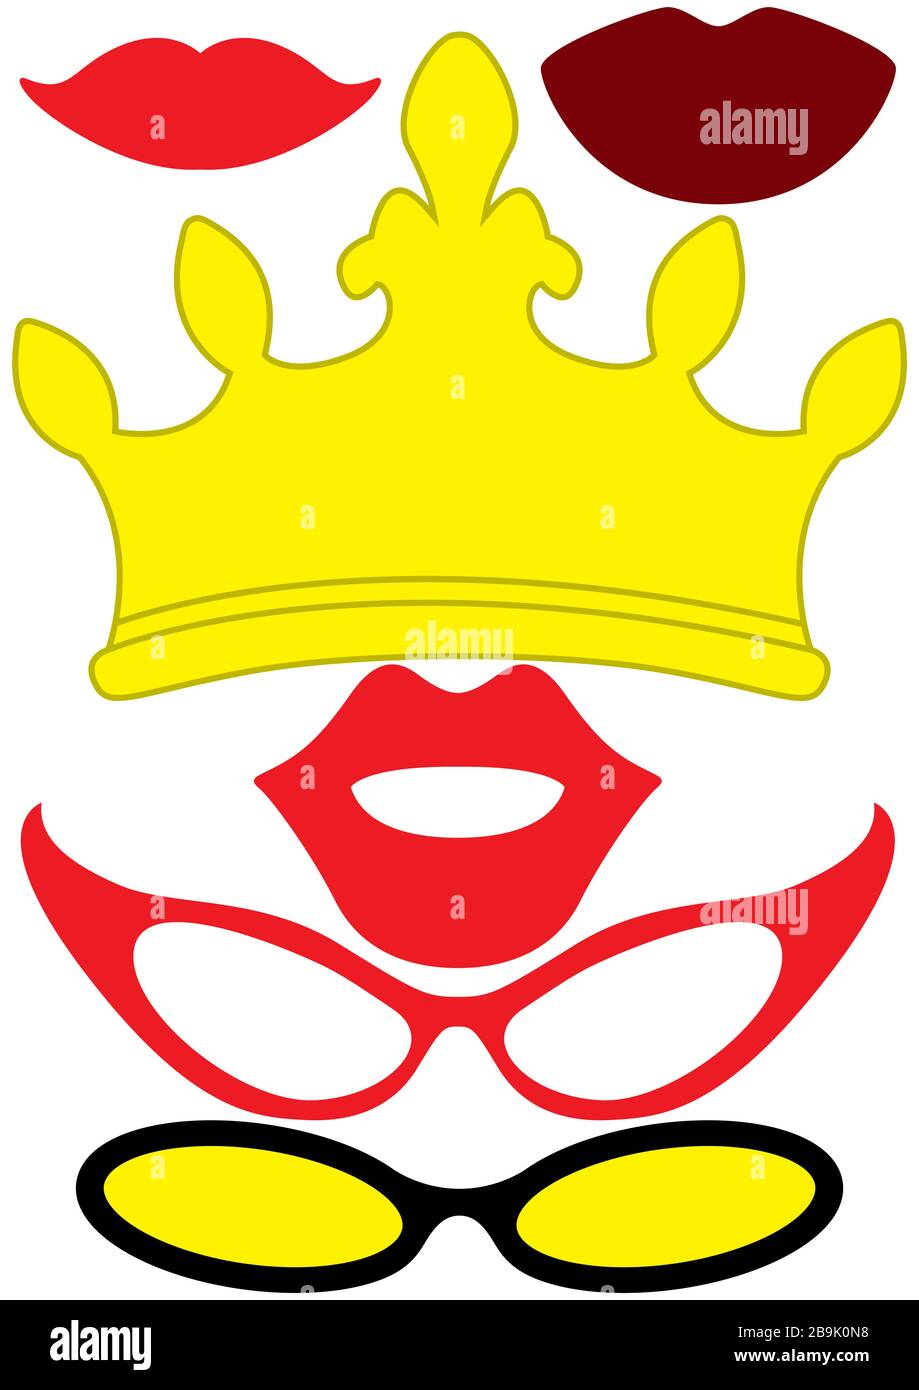 Party accessories set - glasses, crown, lips Stock Vector